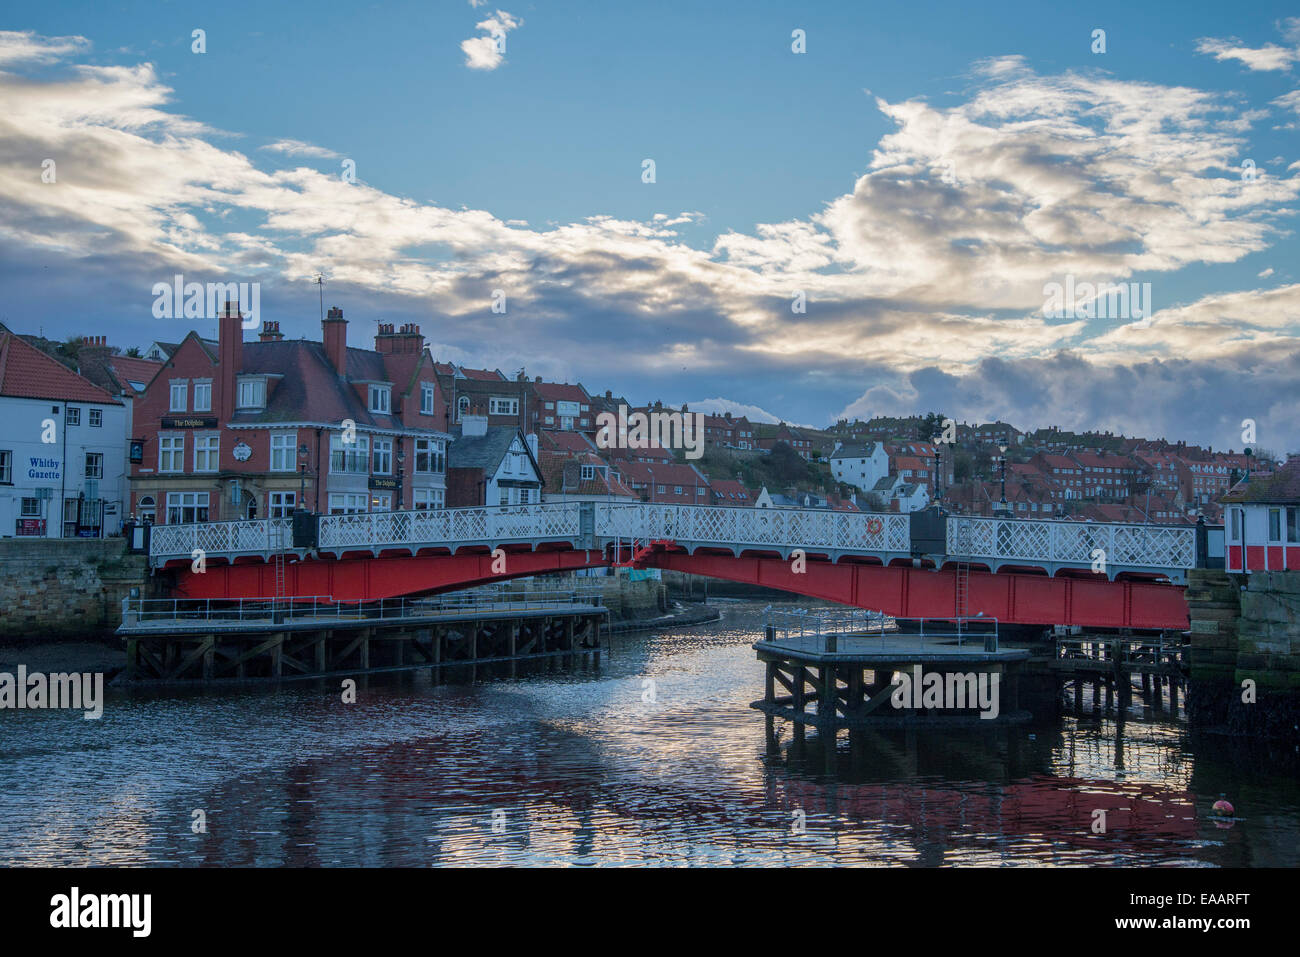 View of the swing bridge over the river Esk in Whitby, North Yorkshire, England, UK in early morning light. November 2014 Stock Photo